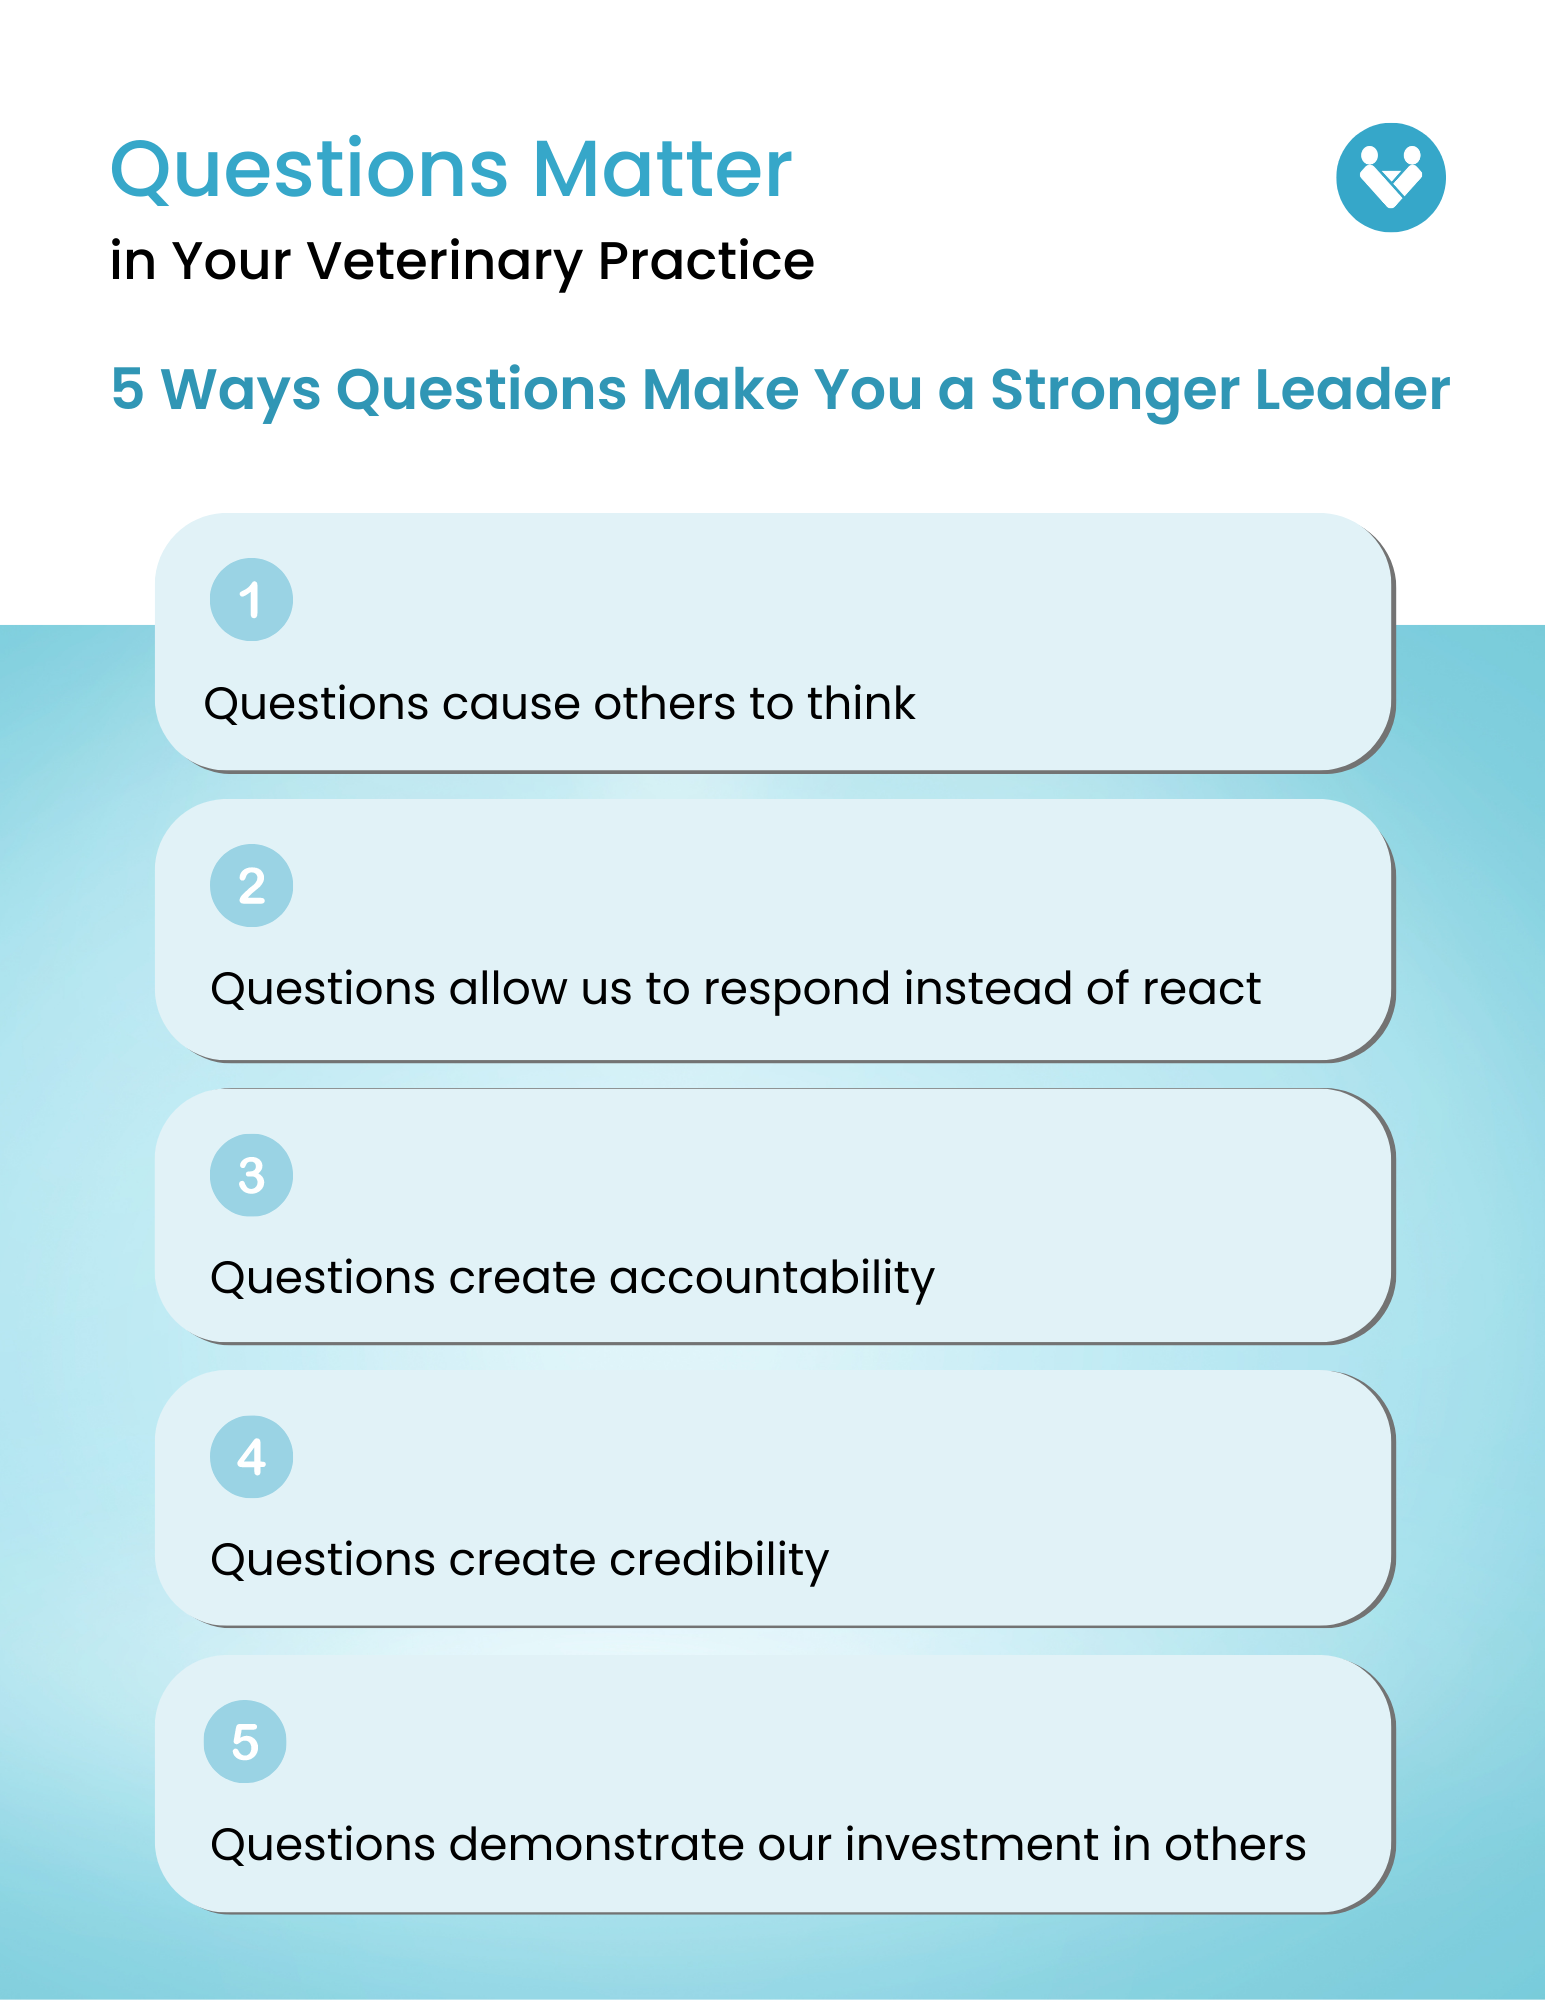 Leaders ask questions in their veterinary practice